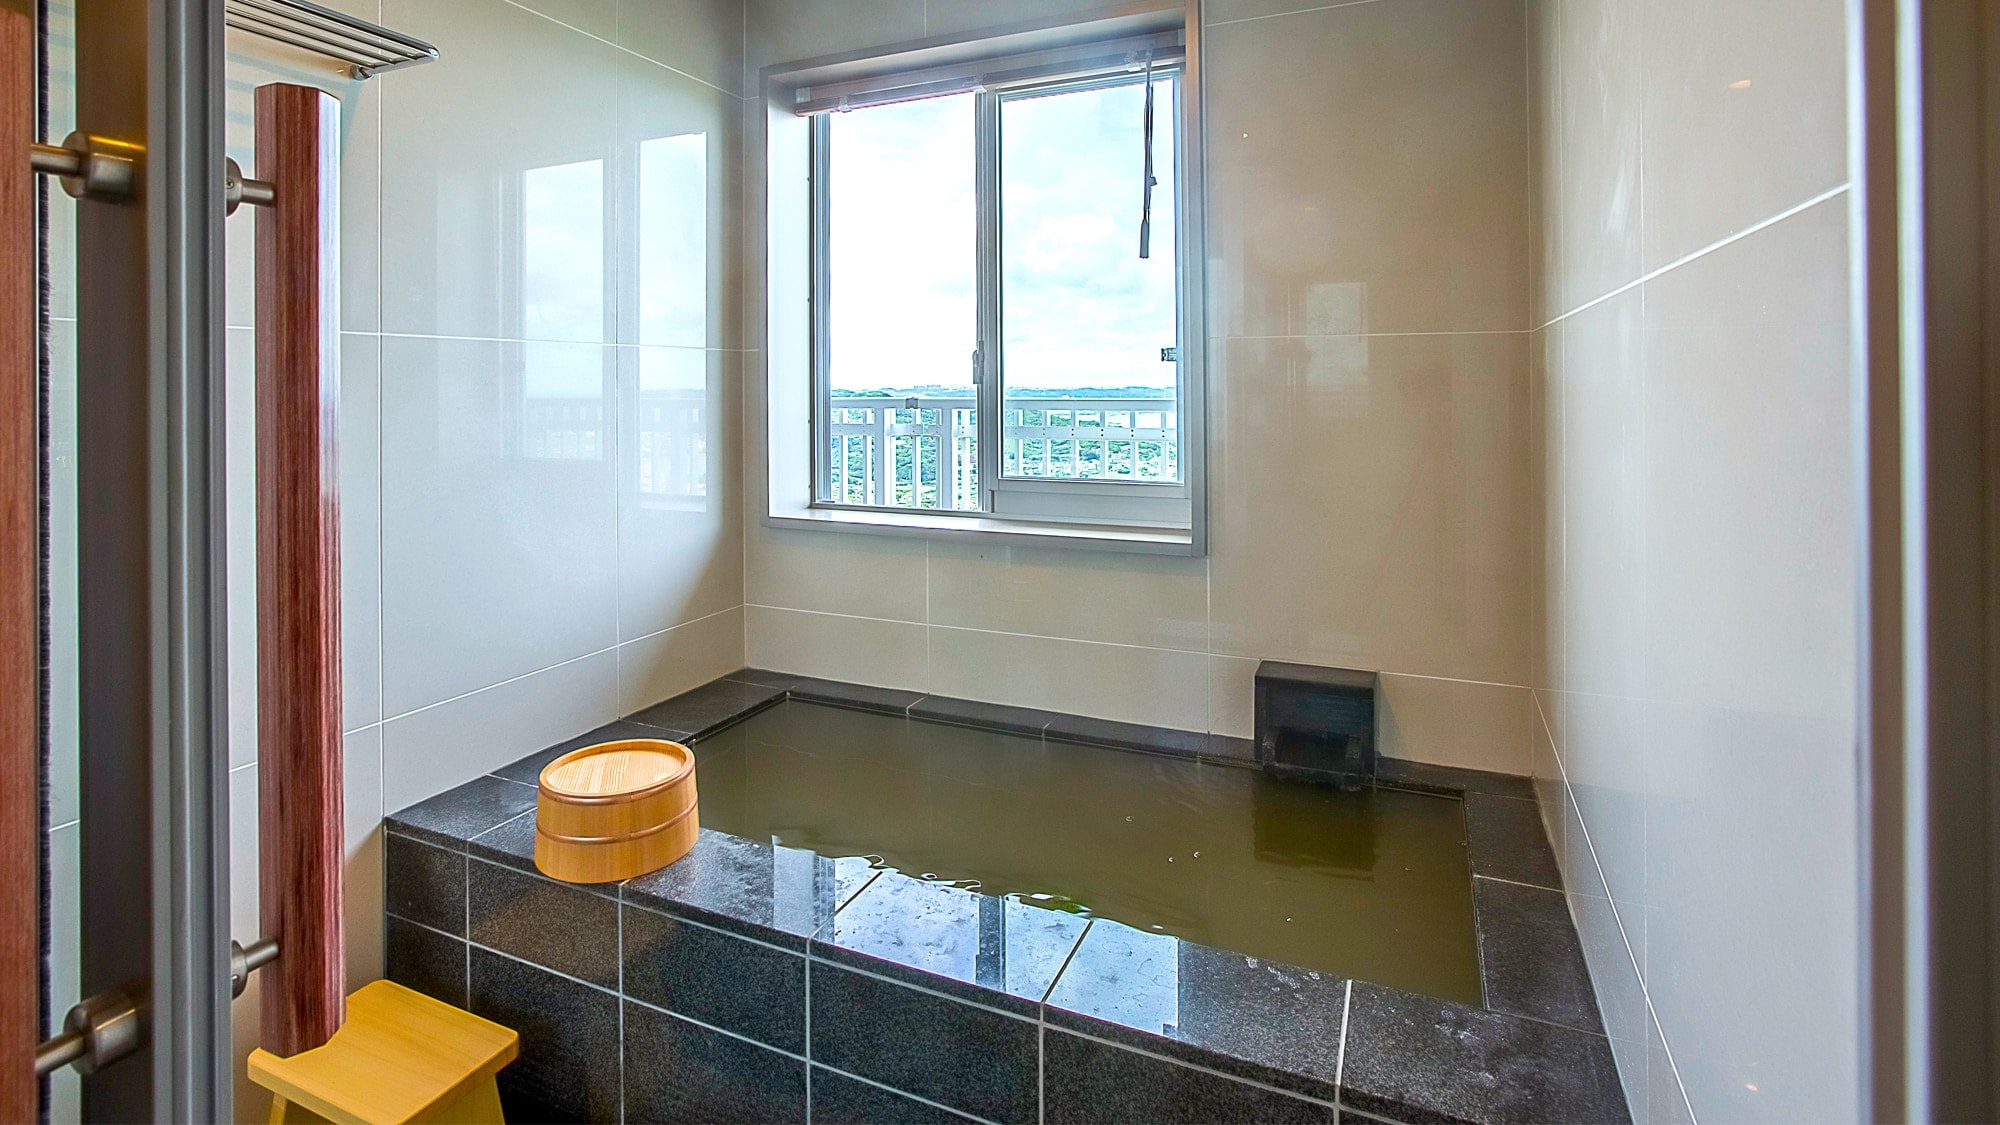 [Annex building] Royal Suite / Suite room where you can enjoy natural hot springs